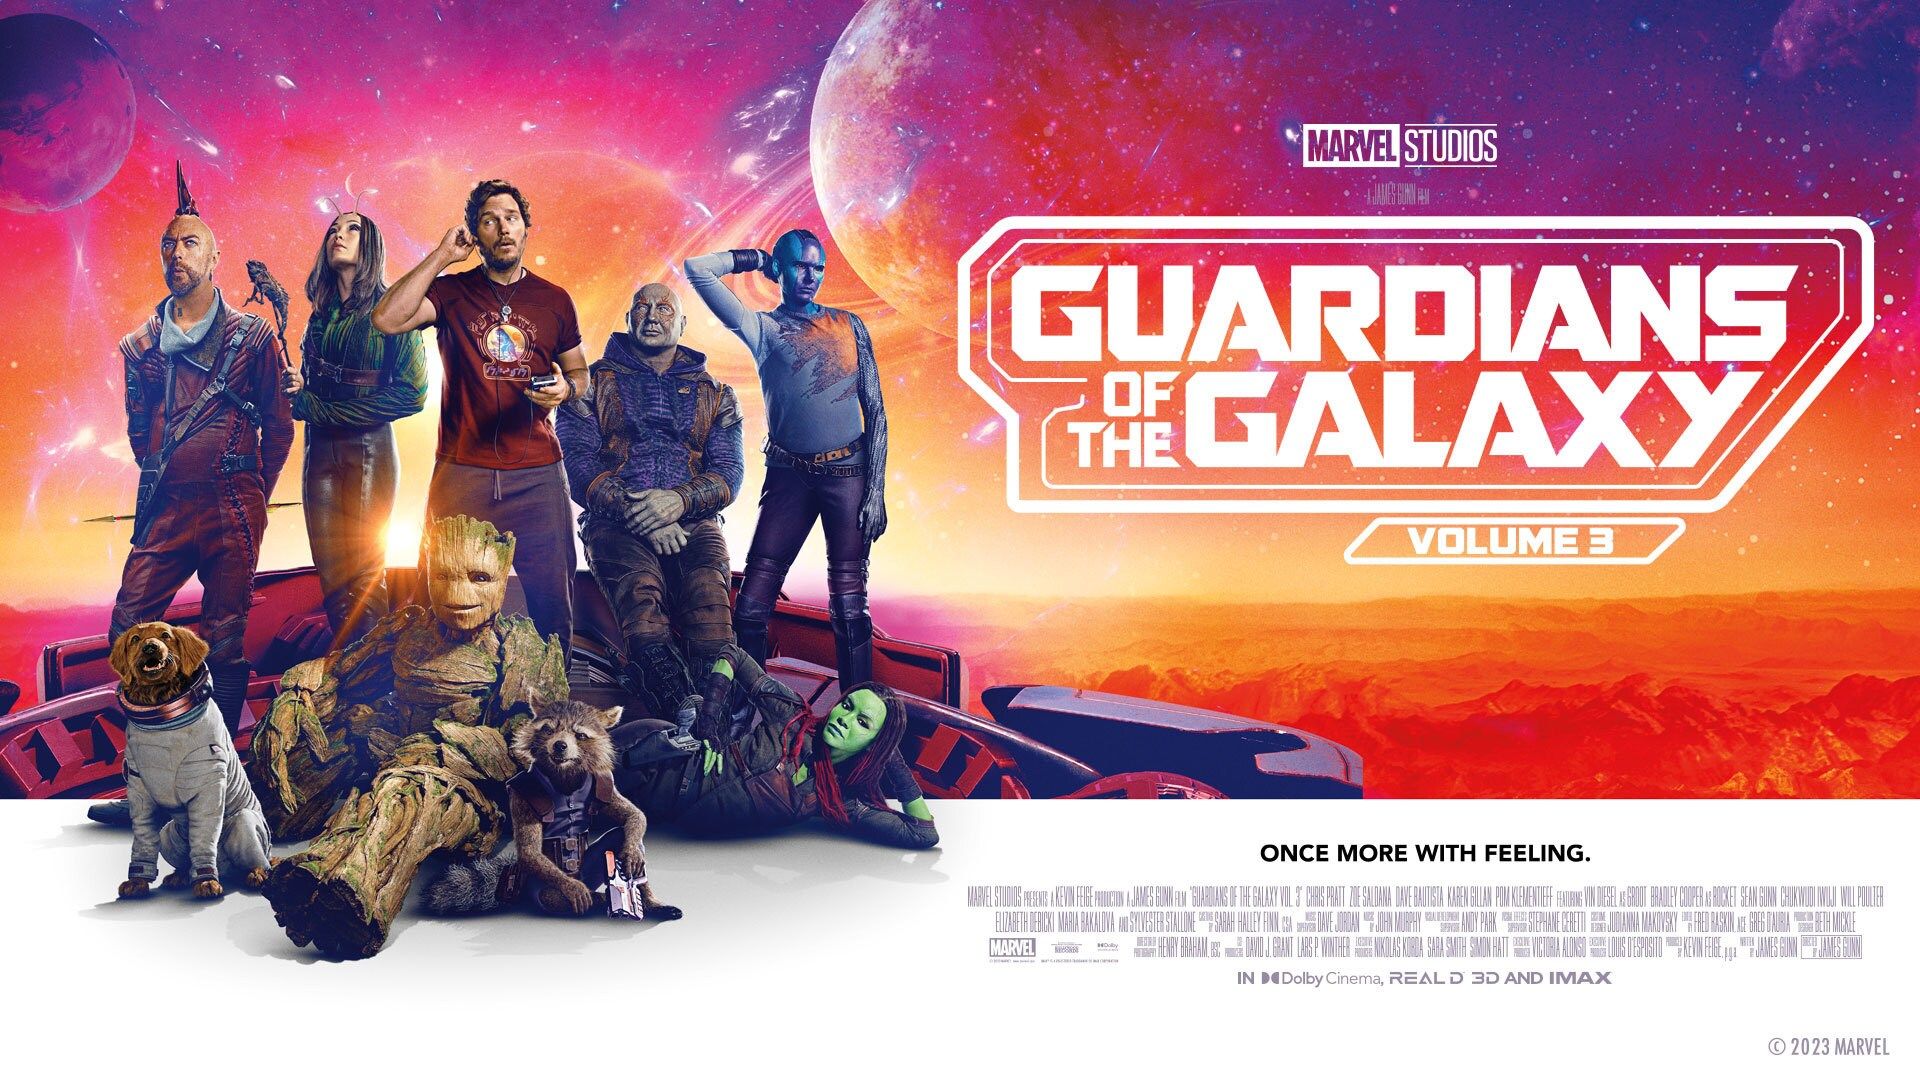 Guardians of the galaxy wallpaper 56365 - Guardians of the Galaxy